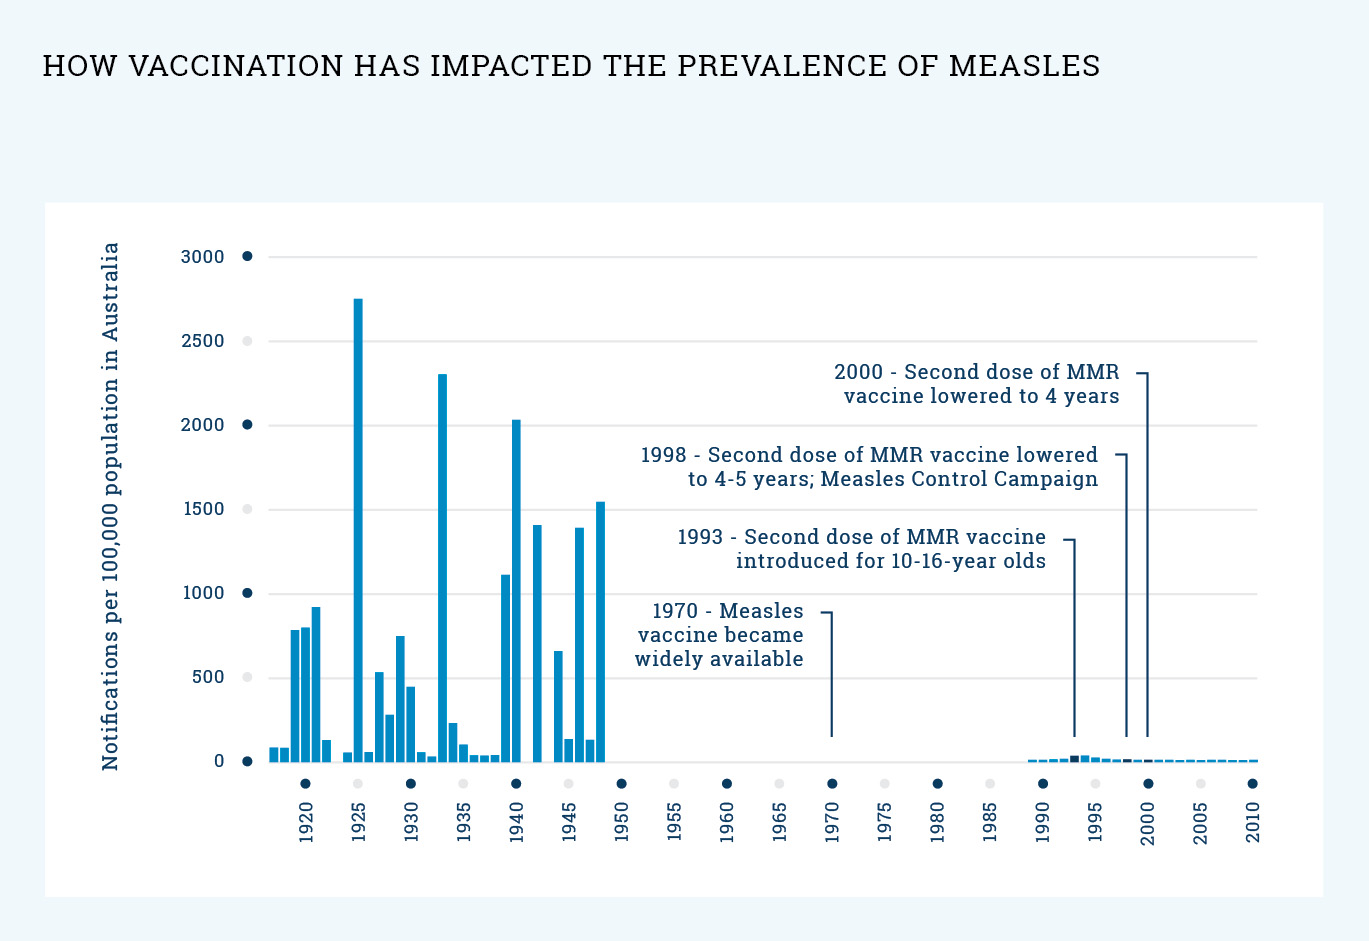 graph: What impact has vaccination had on the prevalence of measles?